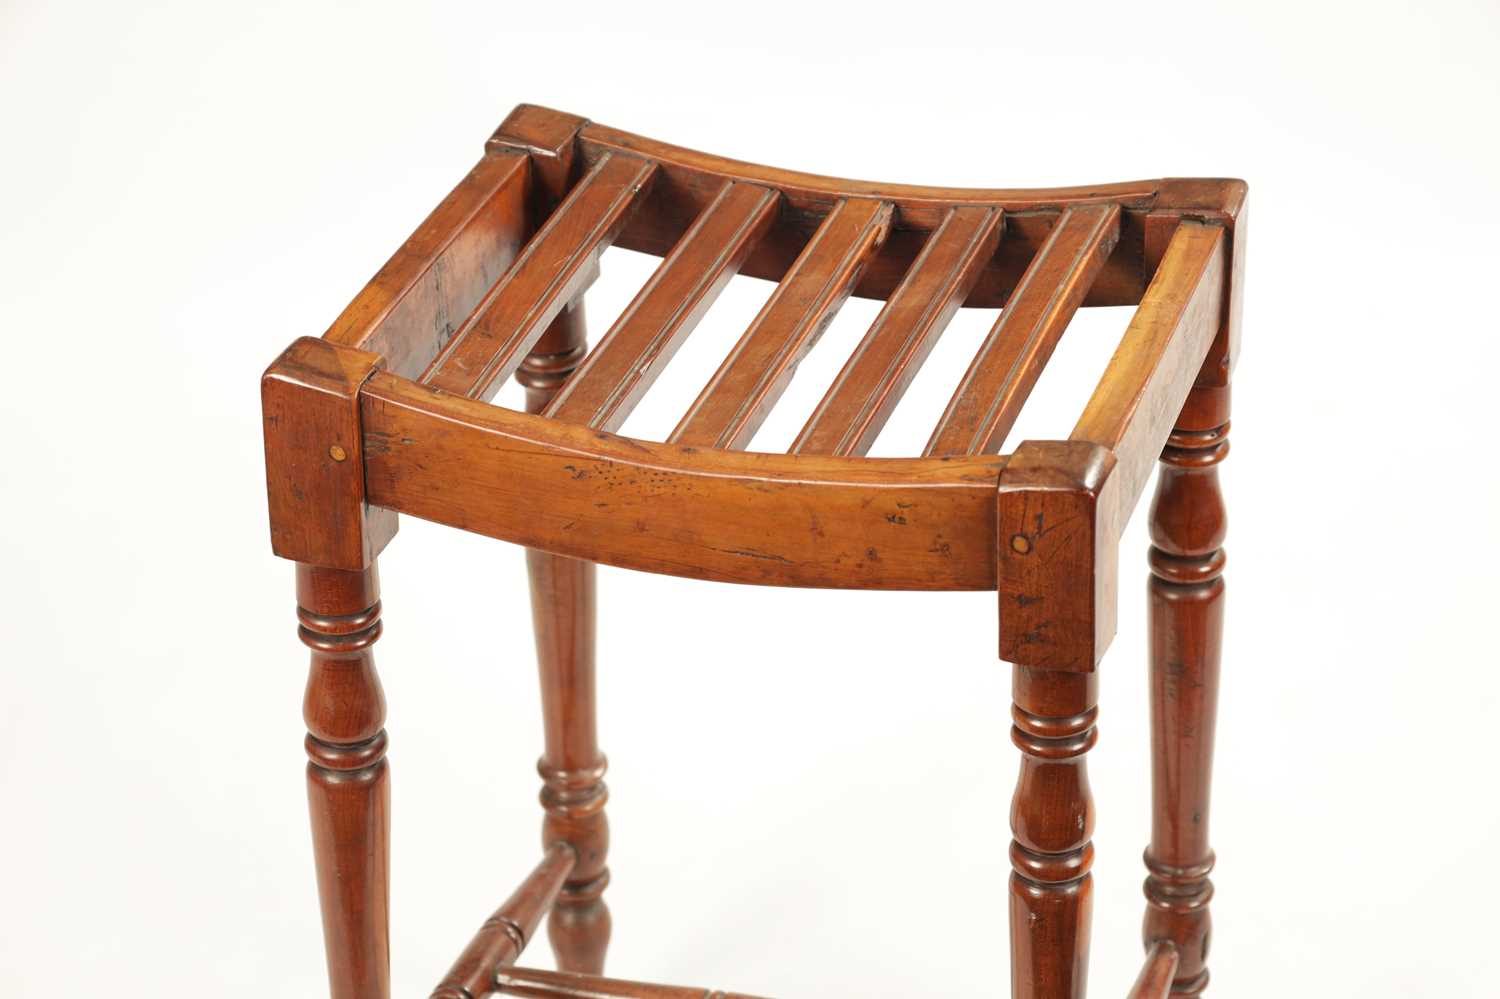 A RARE REGENCY YEW WOOD SLATTED TOP STOOL - Image 2 of 6